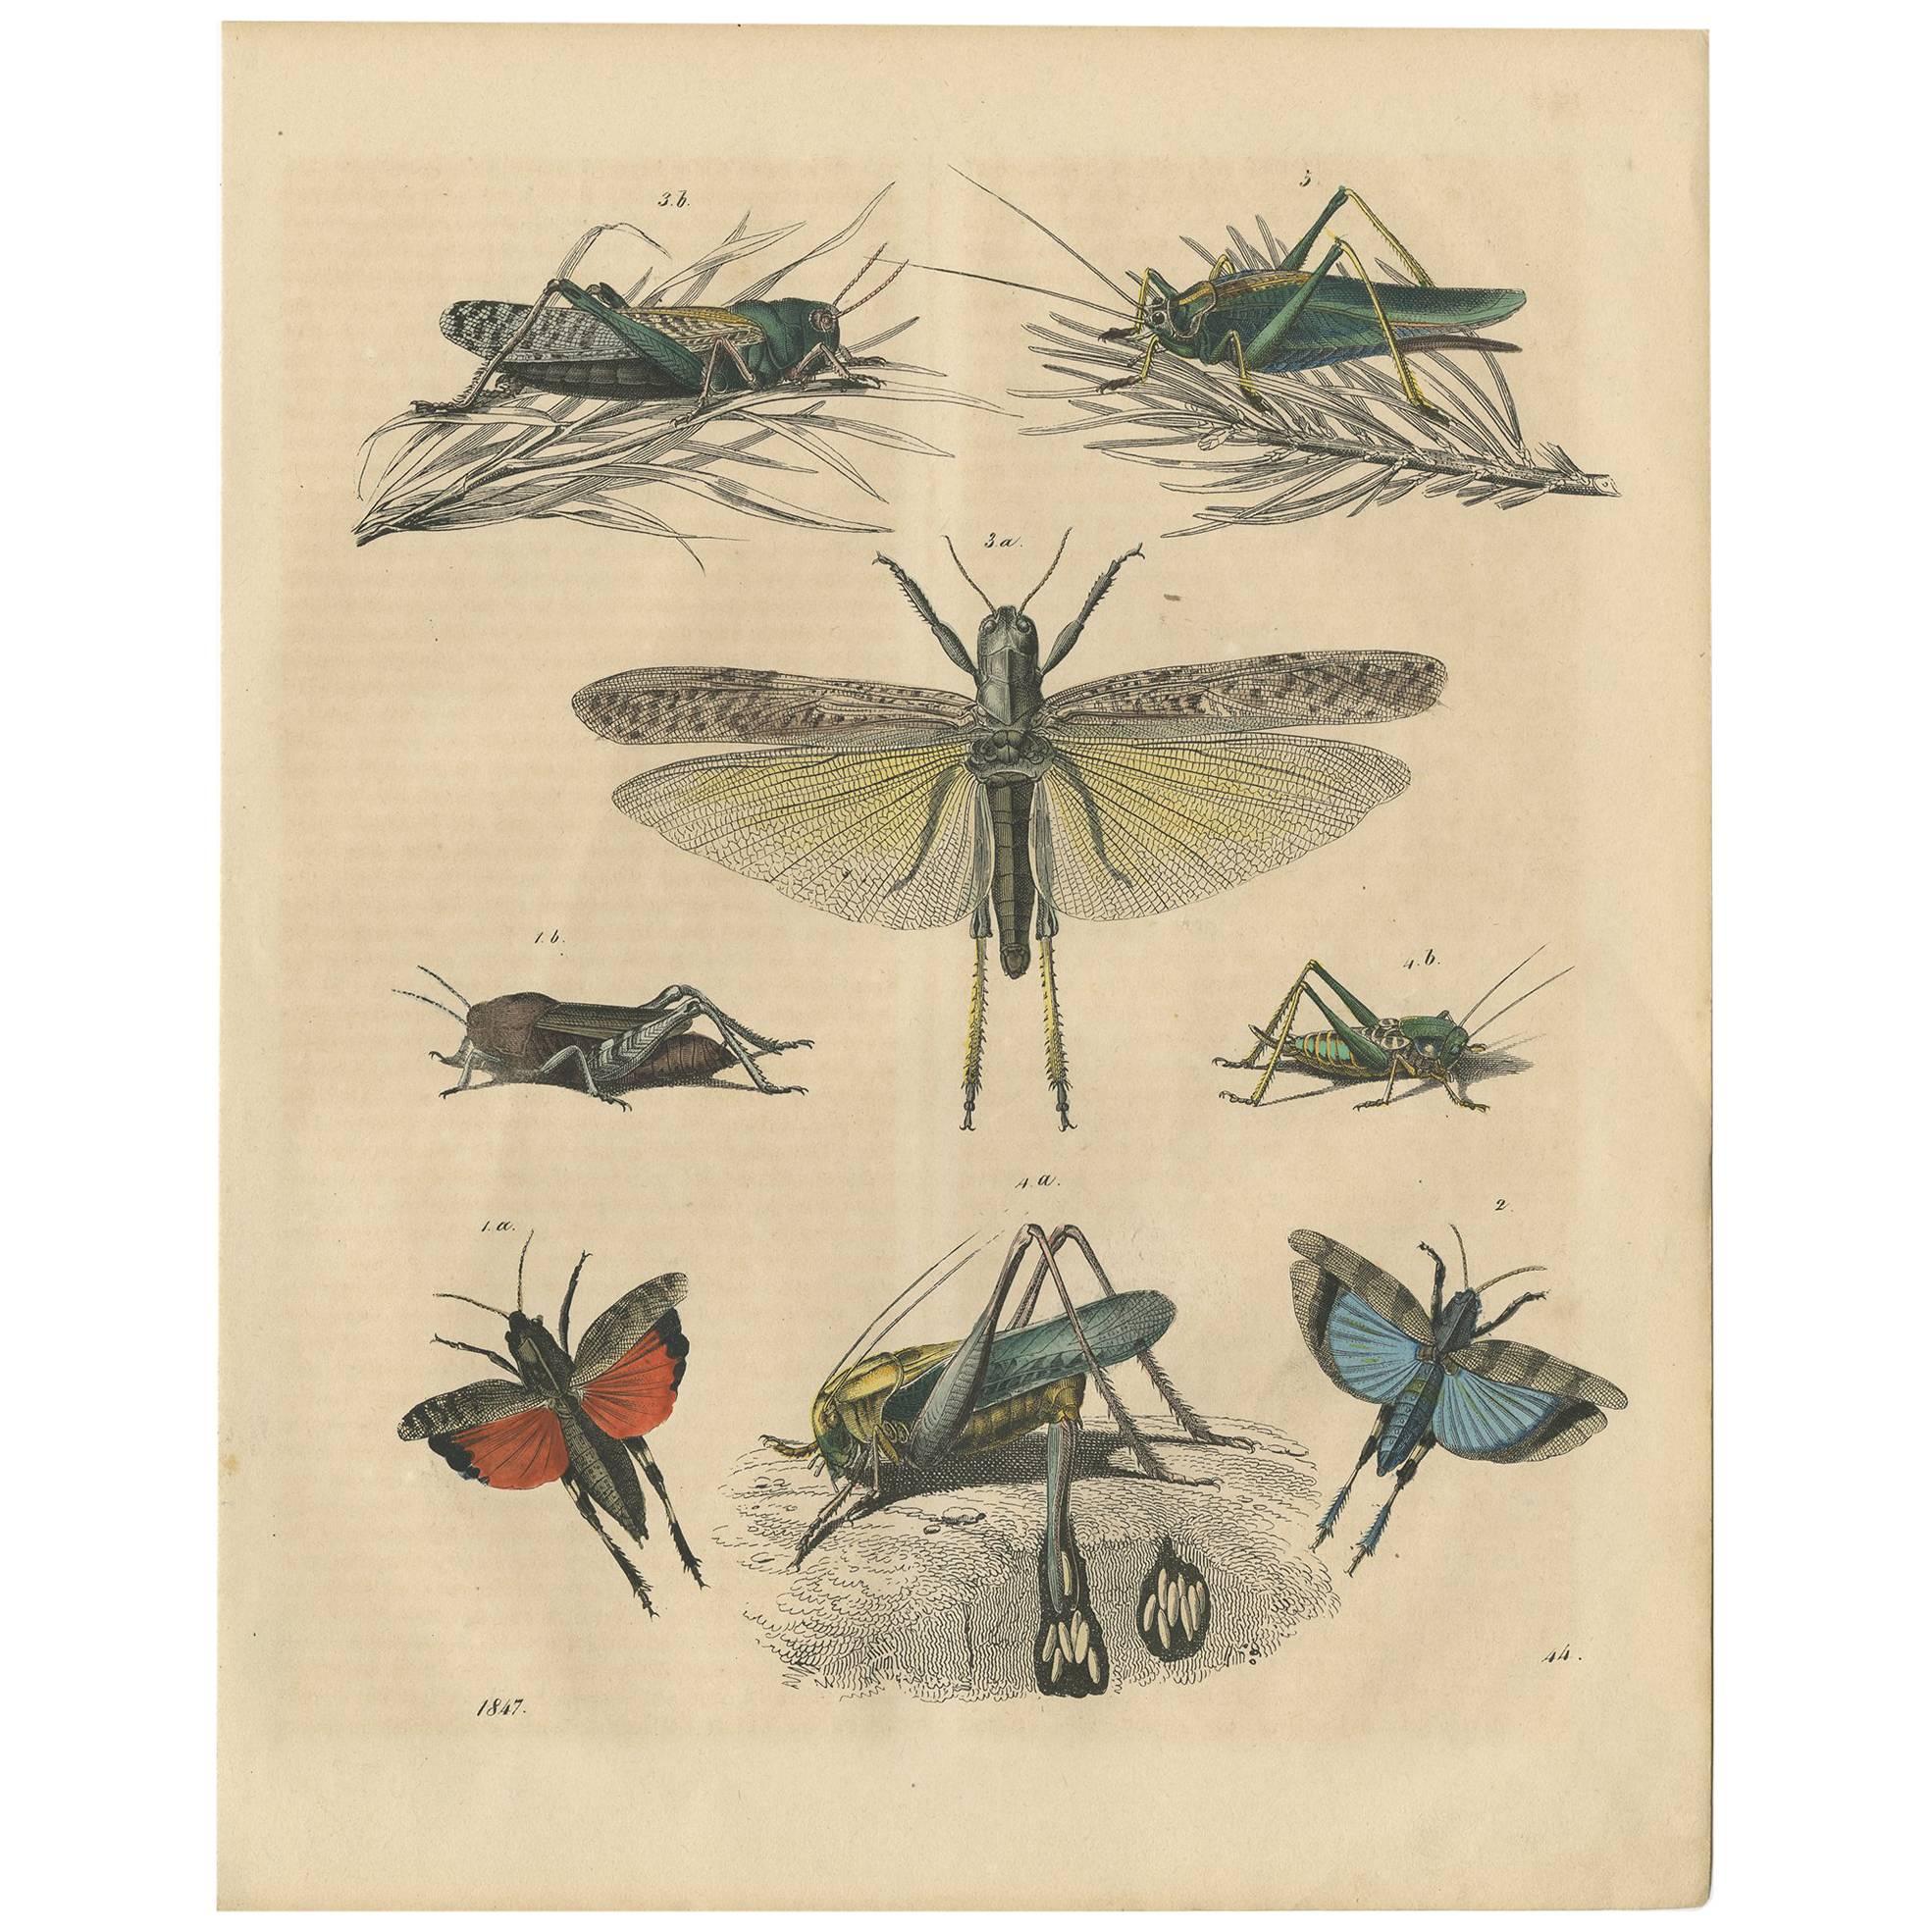 Antique Animal Print of various Insects 'Grasshopper' by C. Hoffmann, 1847 For Sale